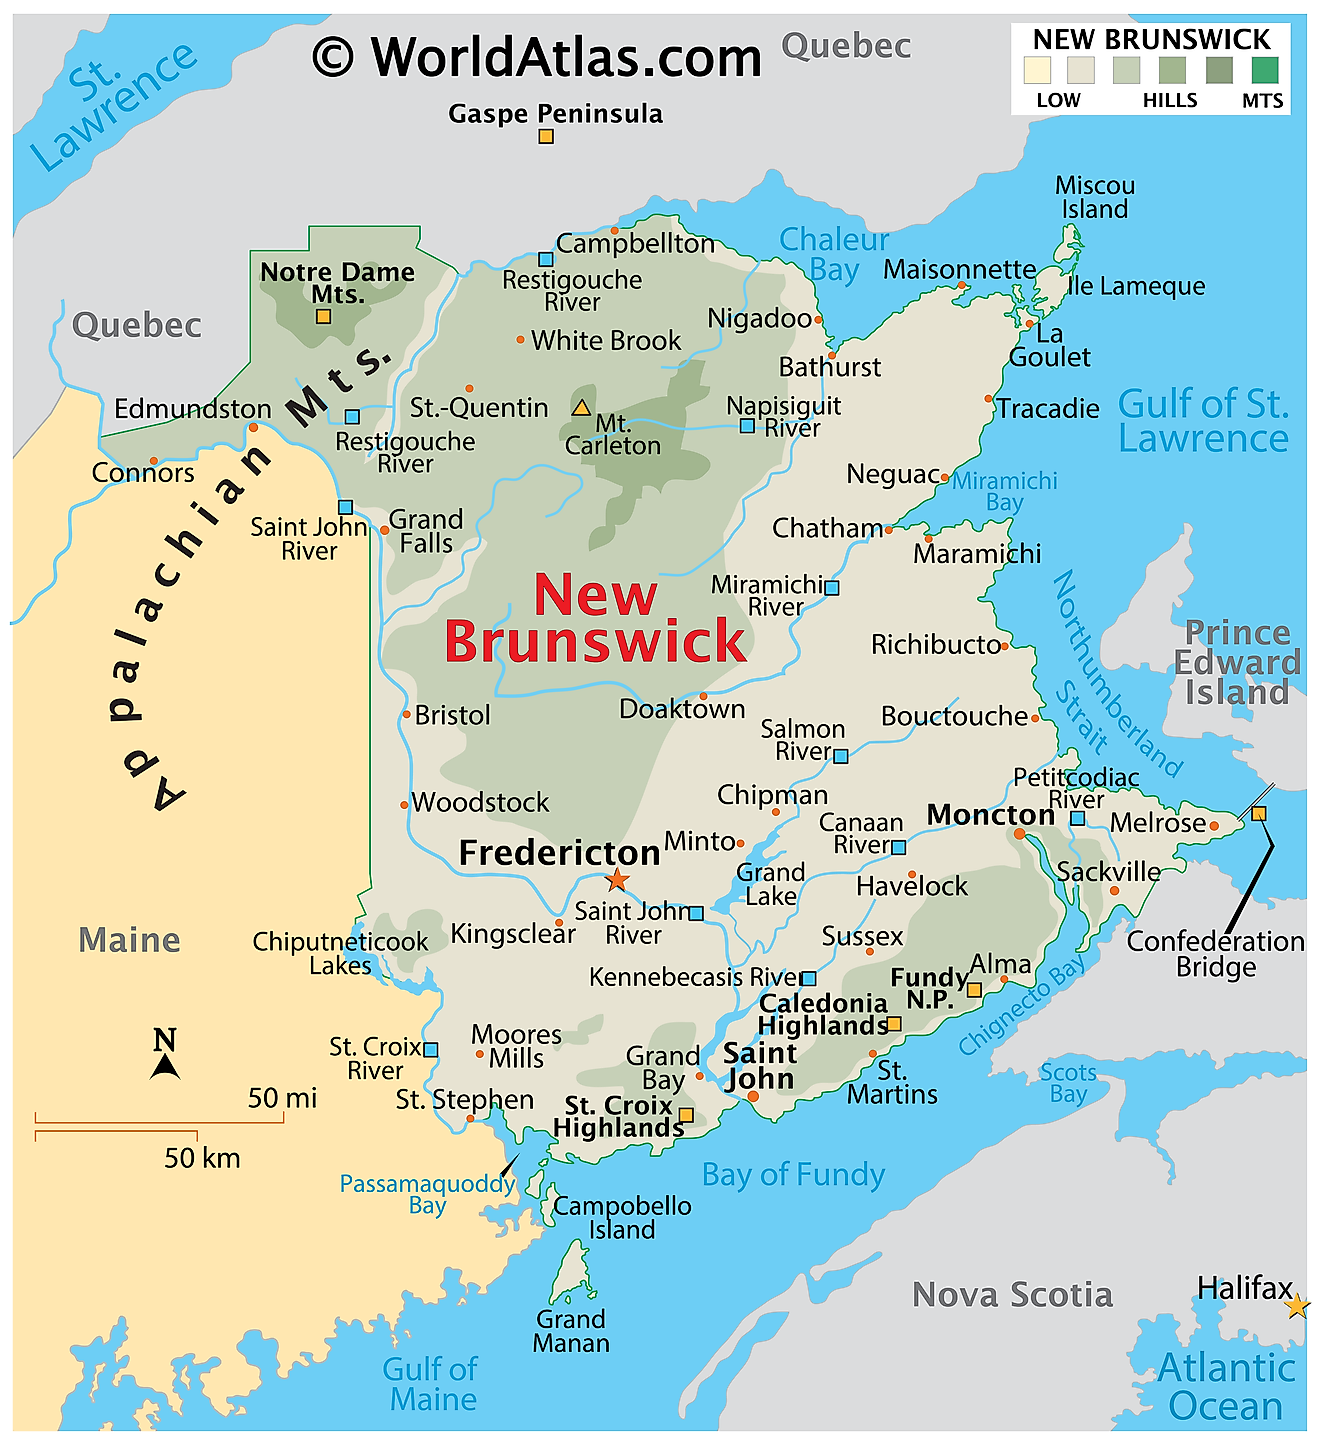 Physical Map of New Brunswick. It shows the physical features of New Brunswick, including mountain ranges, important rivers, major lakes, and islands.